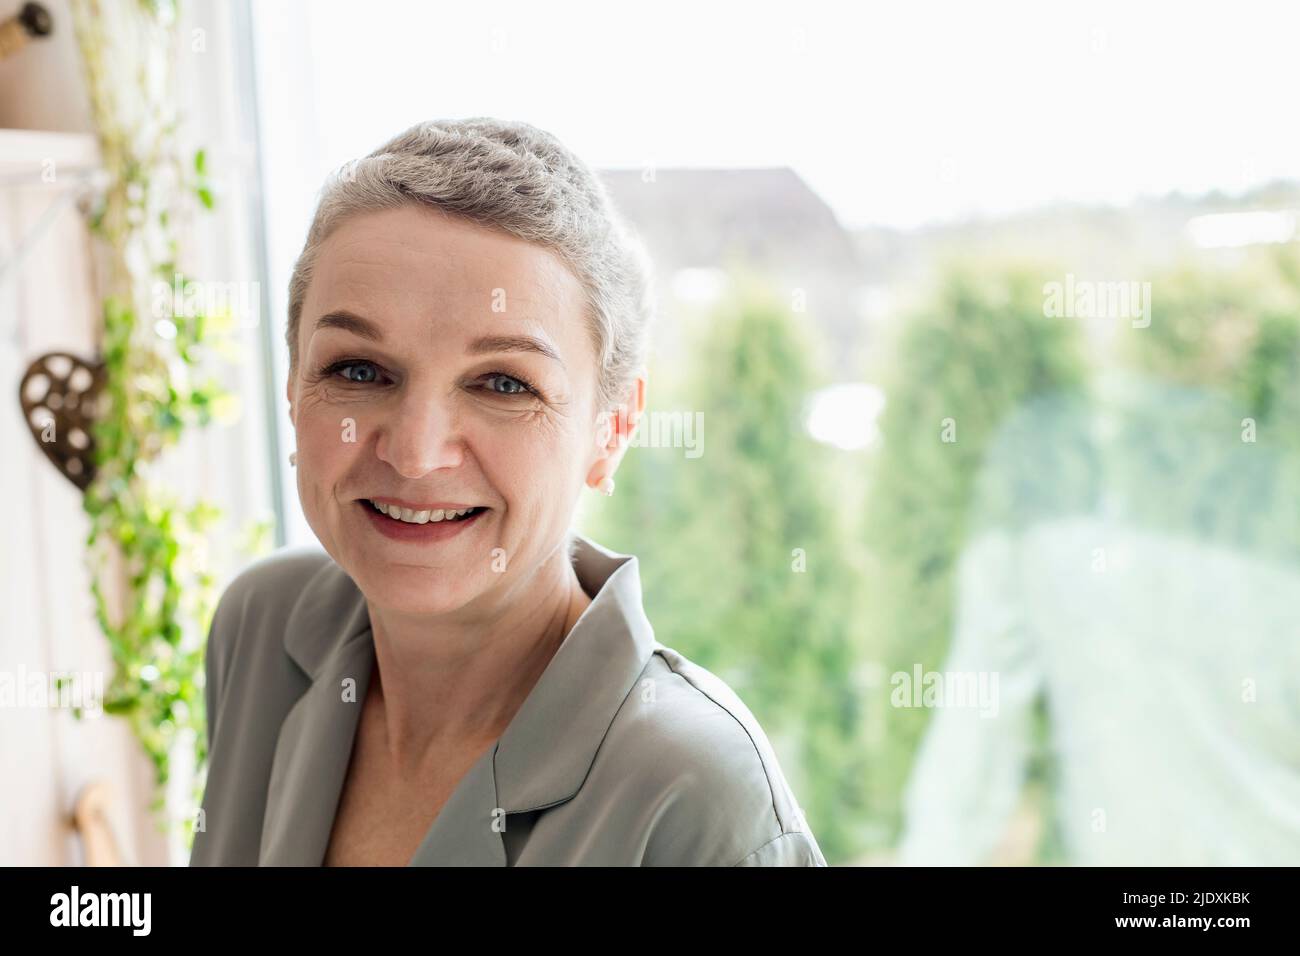 Portrait of mature woman with short grey hair at the window Stock Photo